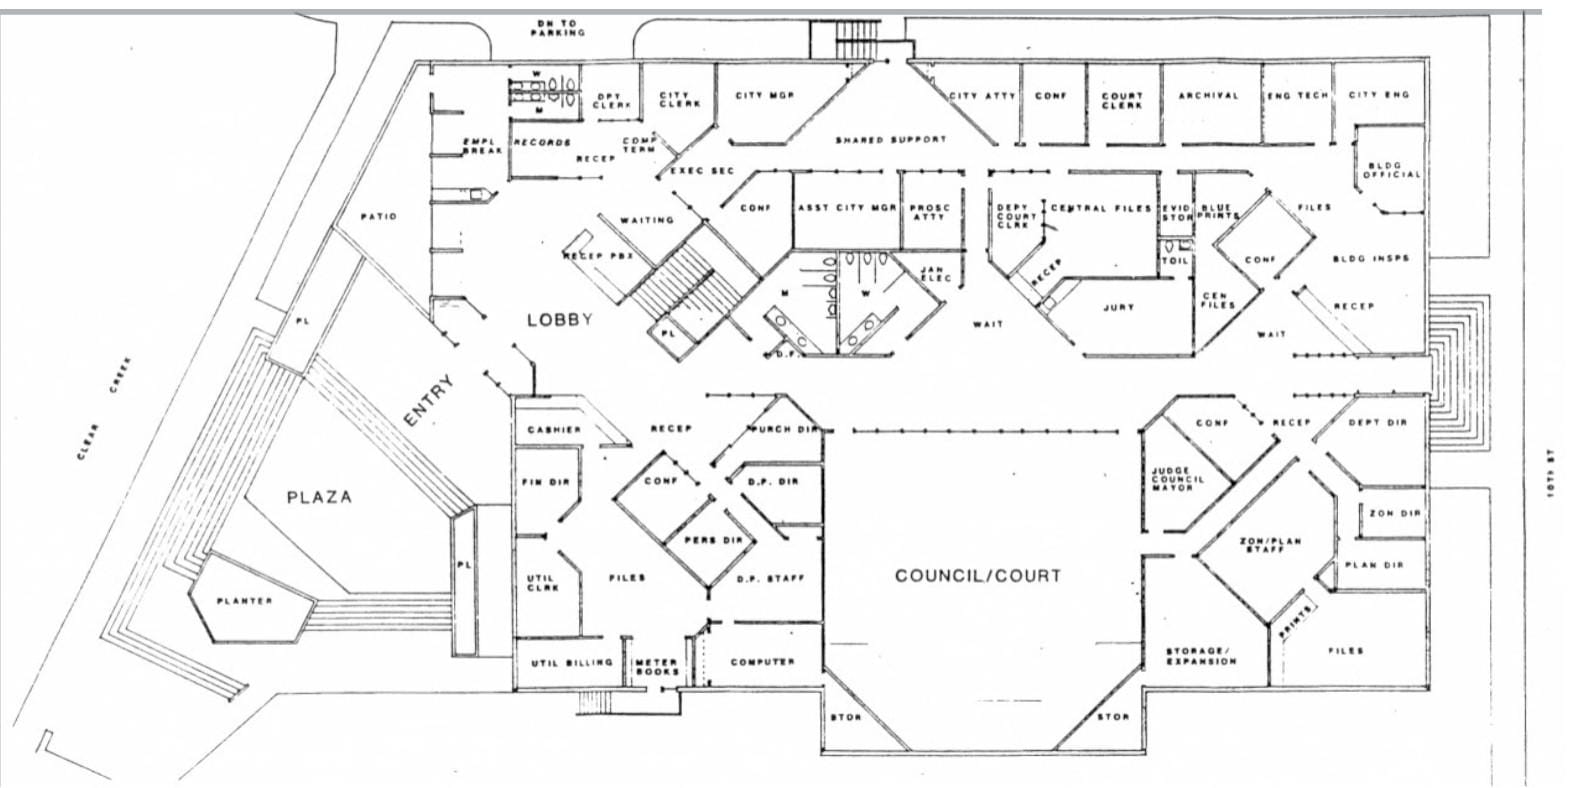 floor plan with a large council/court room, many offices, Clear Creek on one side and 10th St. on the other